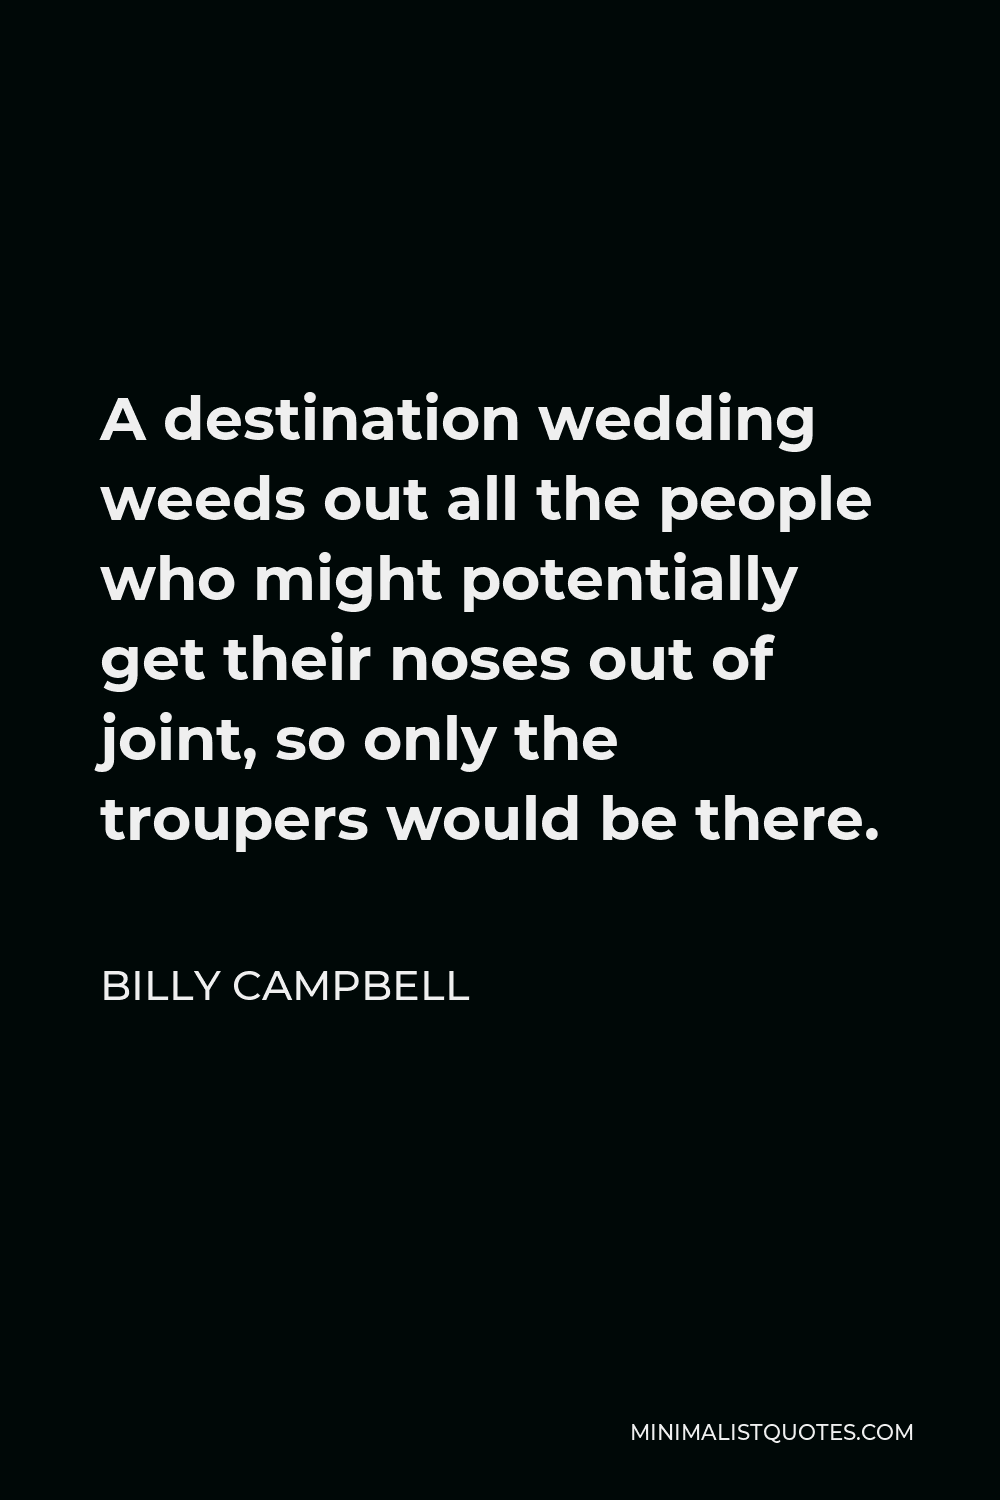 Billy Campbell Quote - A destination wedding weeds out all the people who might potentially get their noses out of joint, so only the troupers would be there.